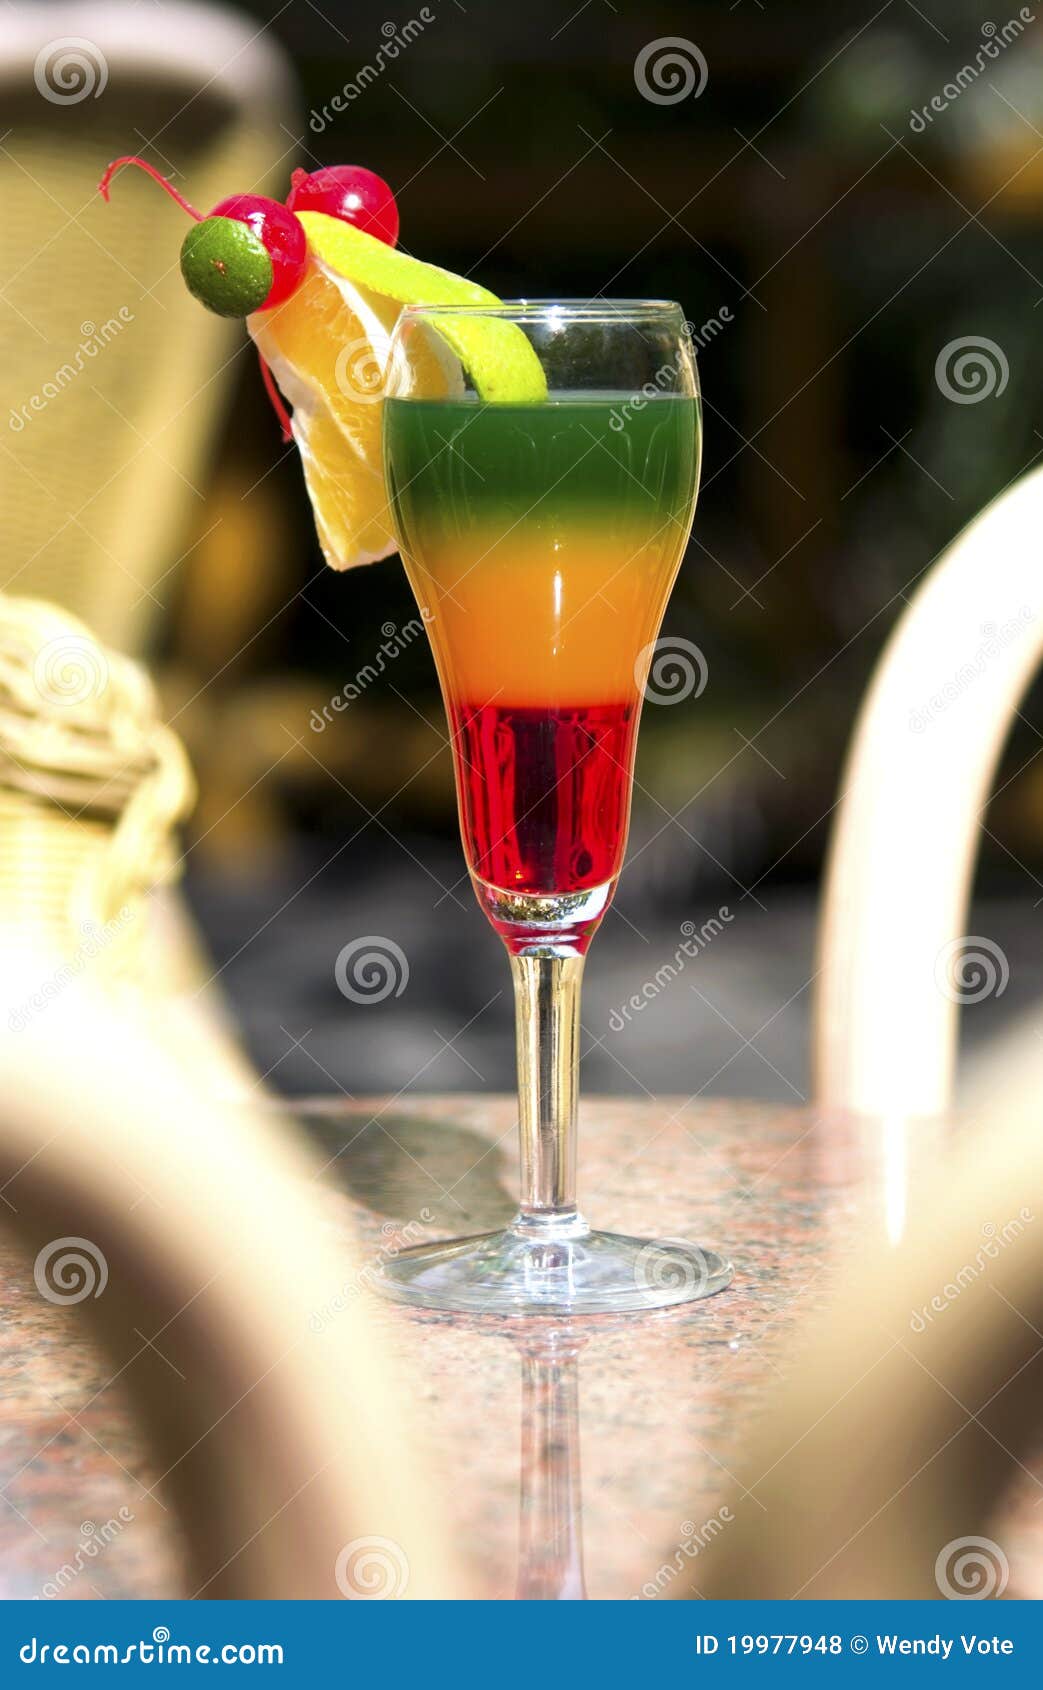 Tropical drink stock photo. Image of still, cocktail - 19977948